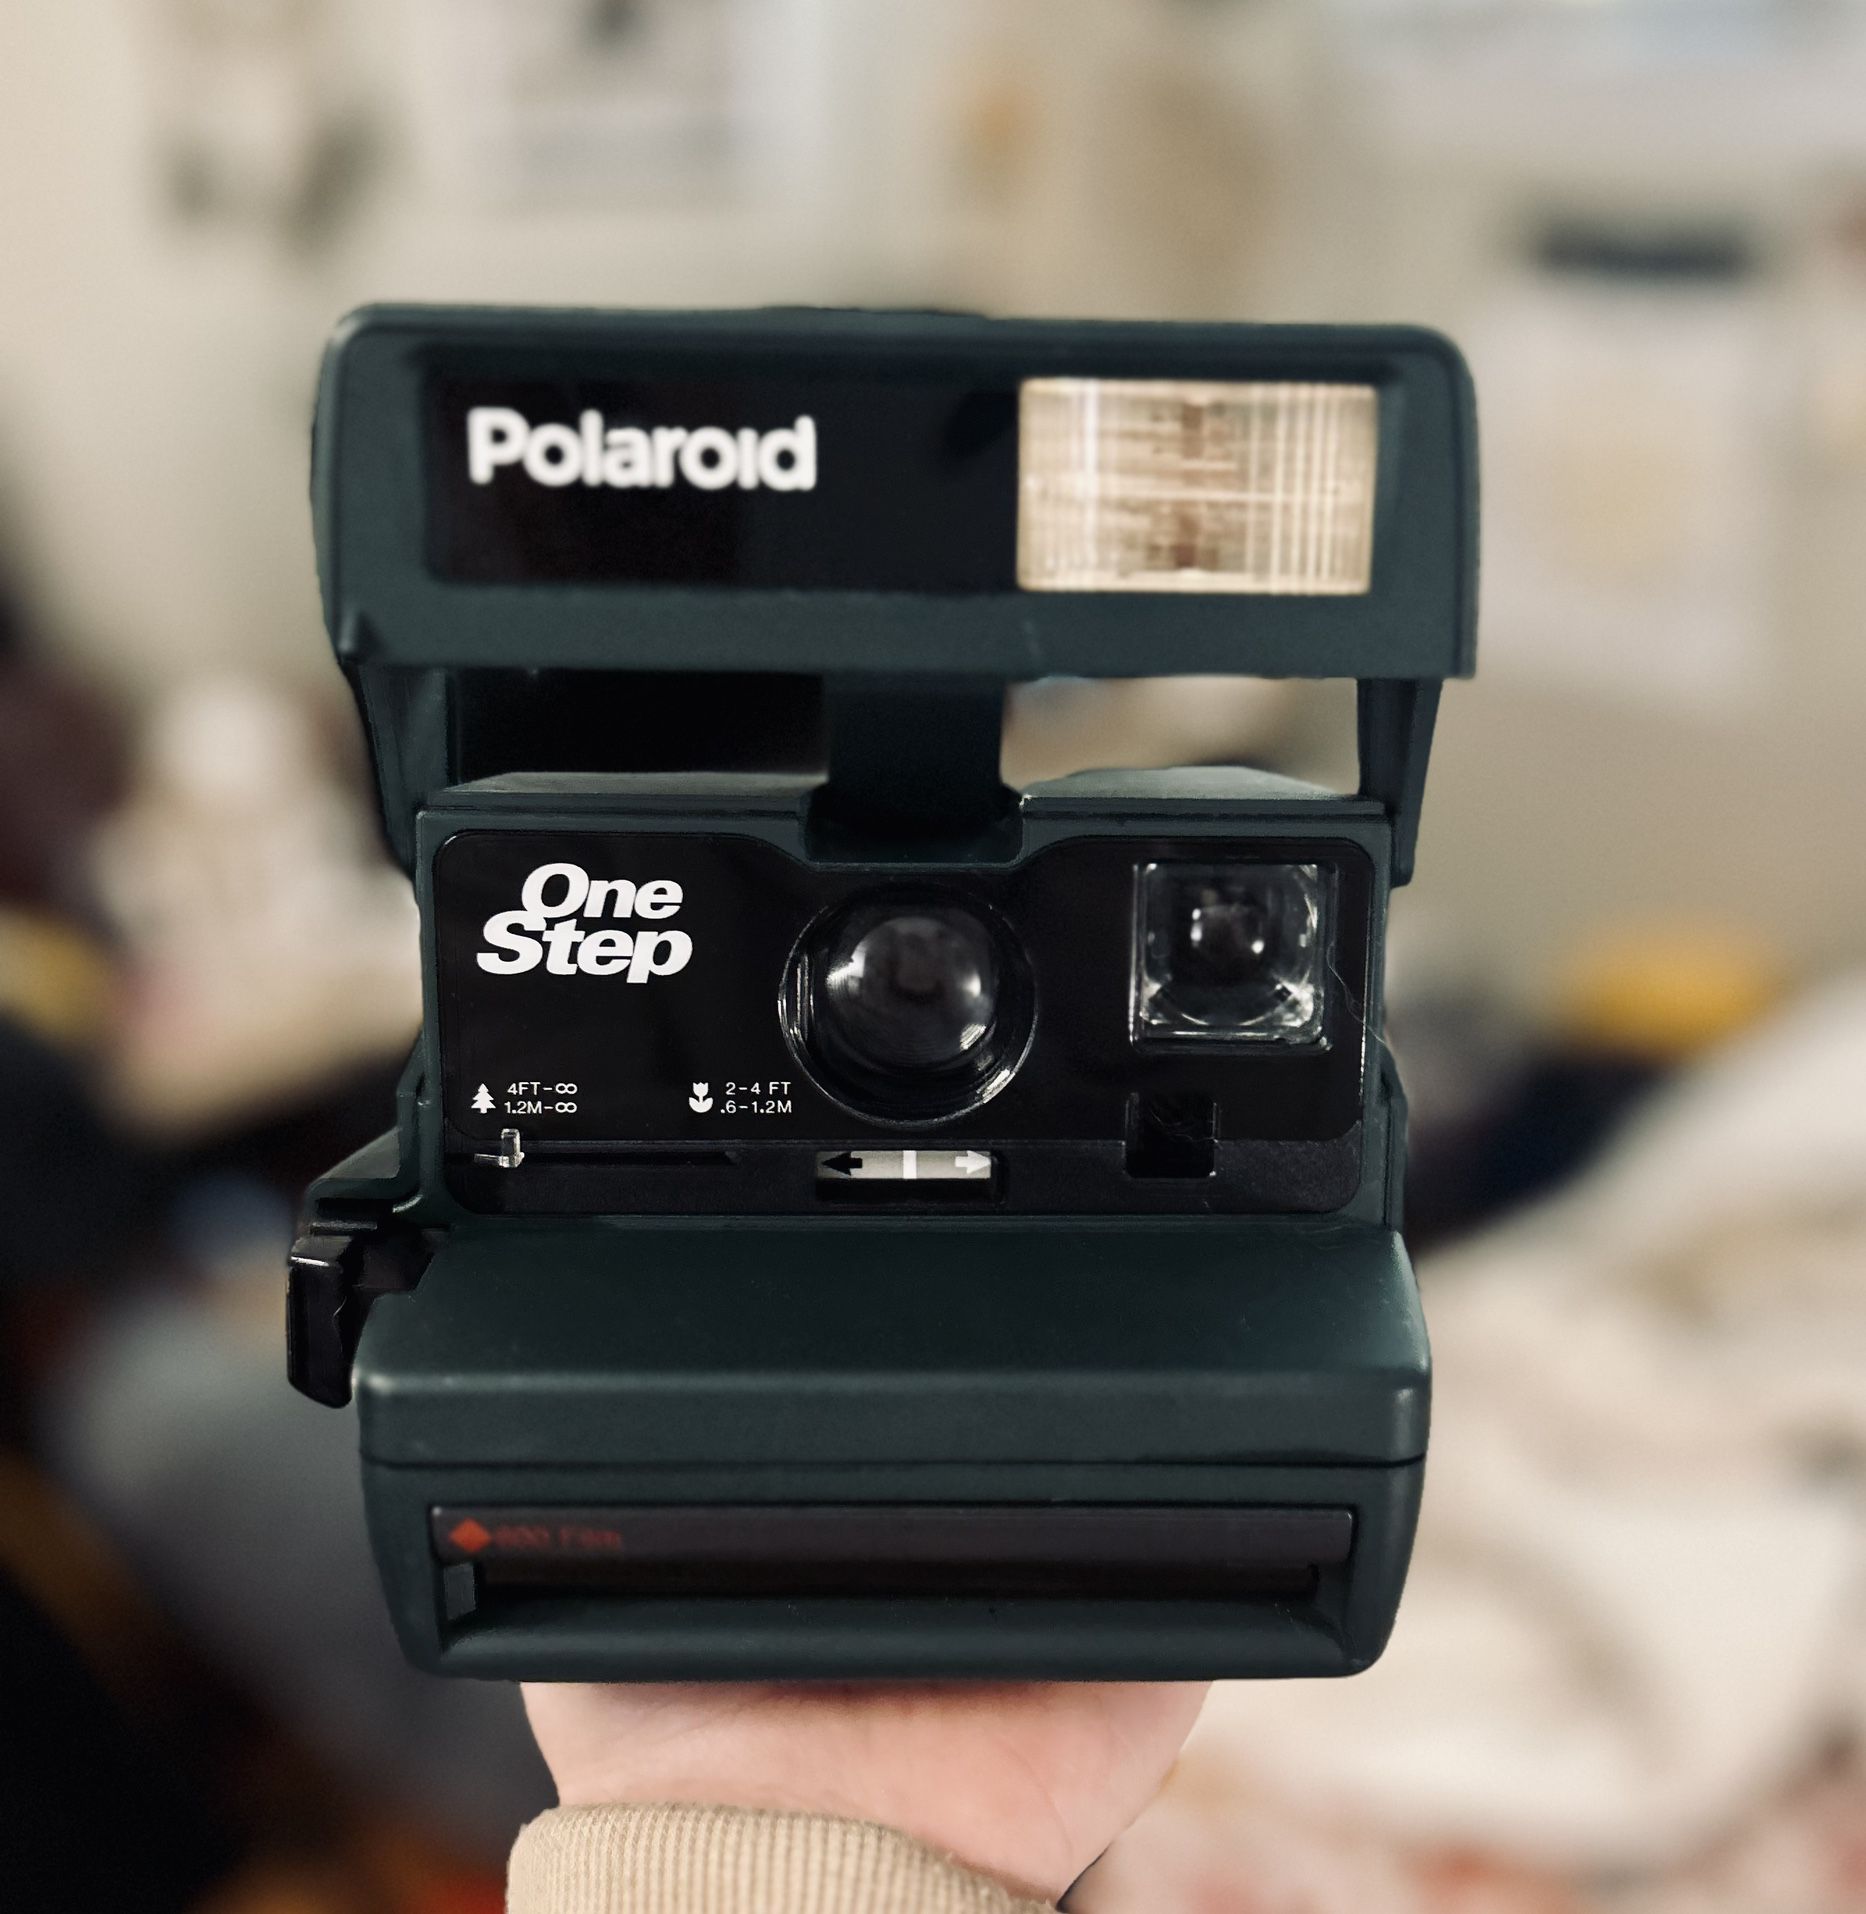 Limited Edition One Step 600 Instant Polaroid Camera